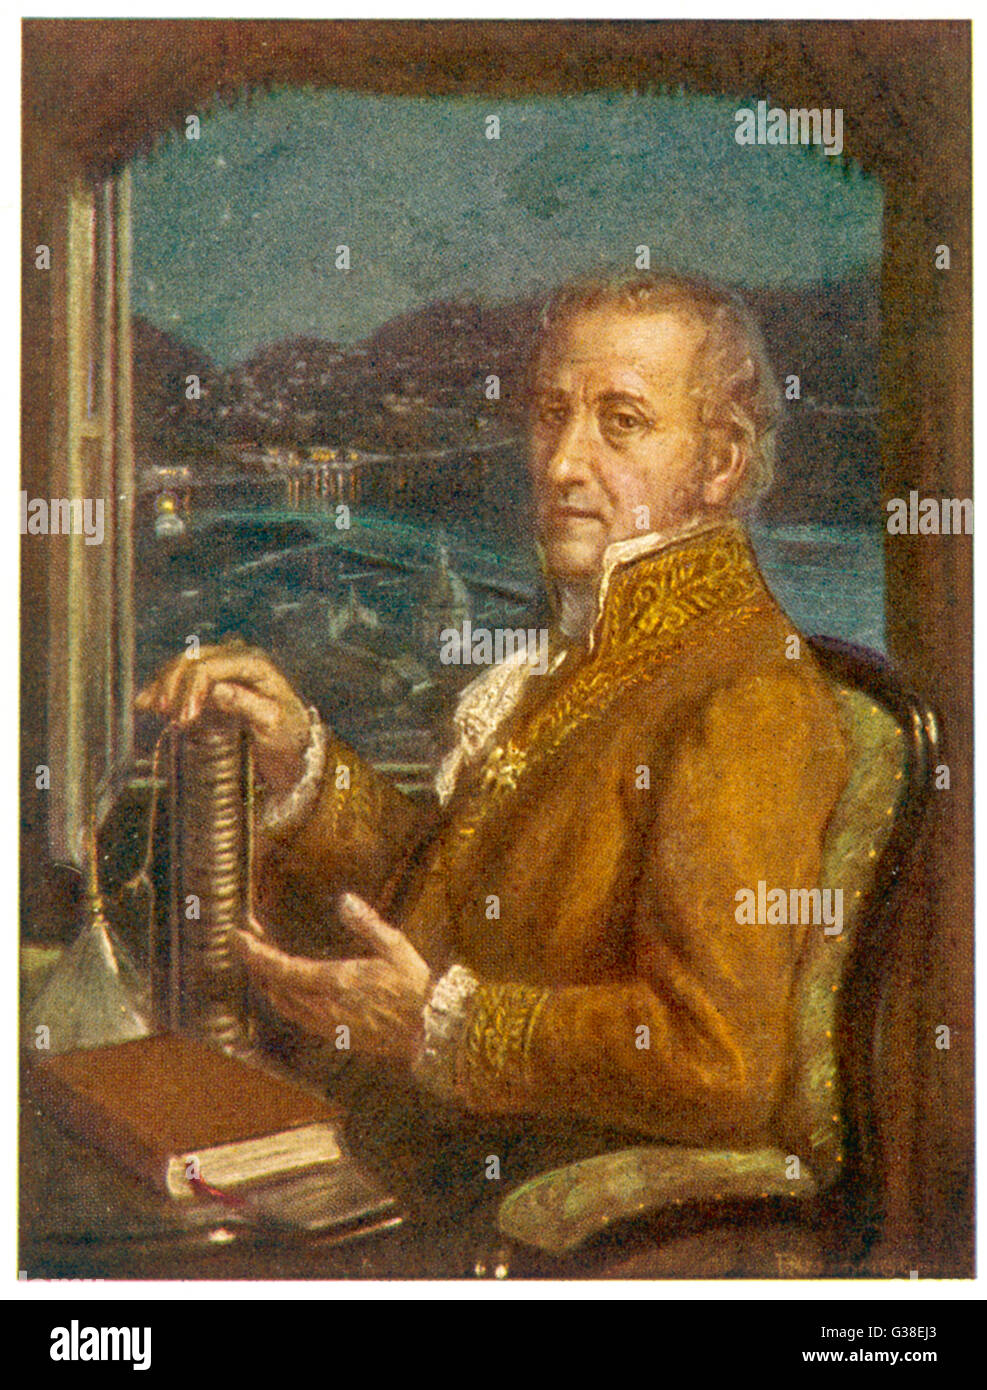 count ALESSANDRO VOLTA  Italian scientist, depicted holding his battery       Date: 1745 - 1827 Stock Photo